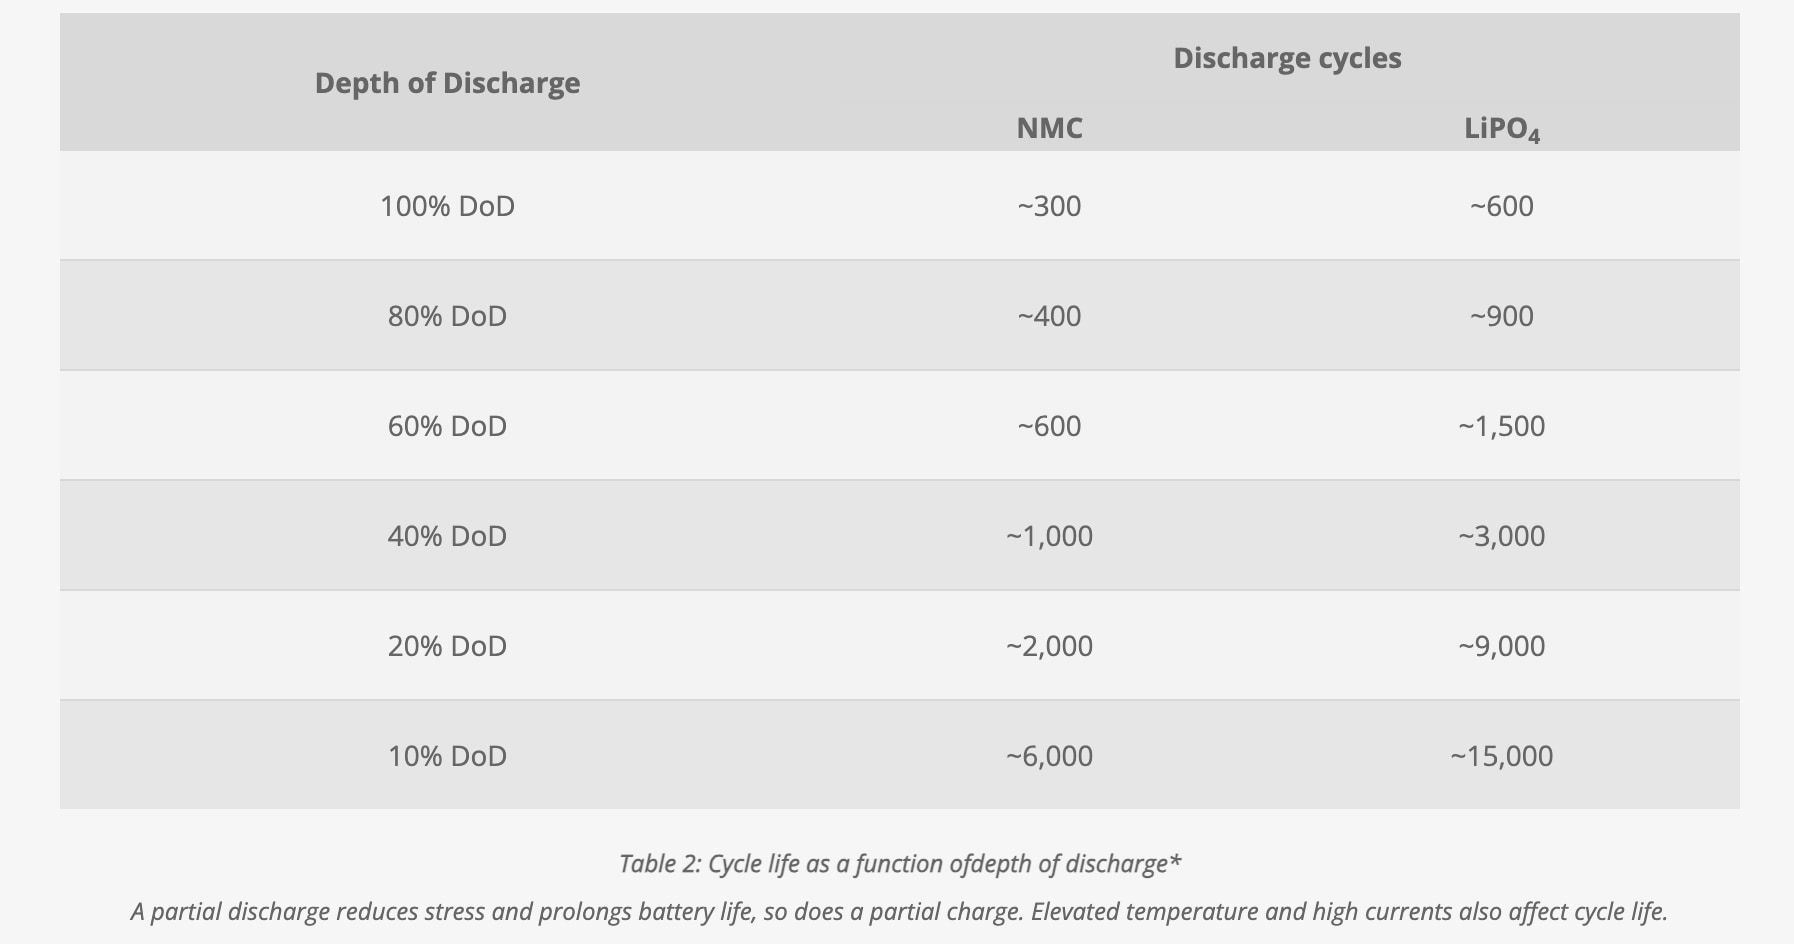 discharge cycles reduce battery lifespan